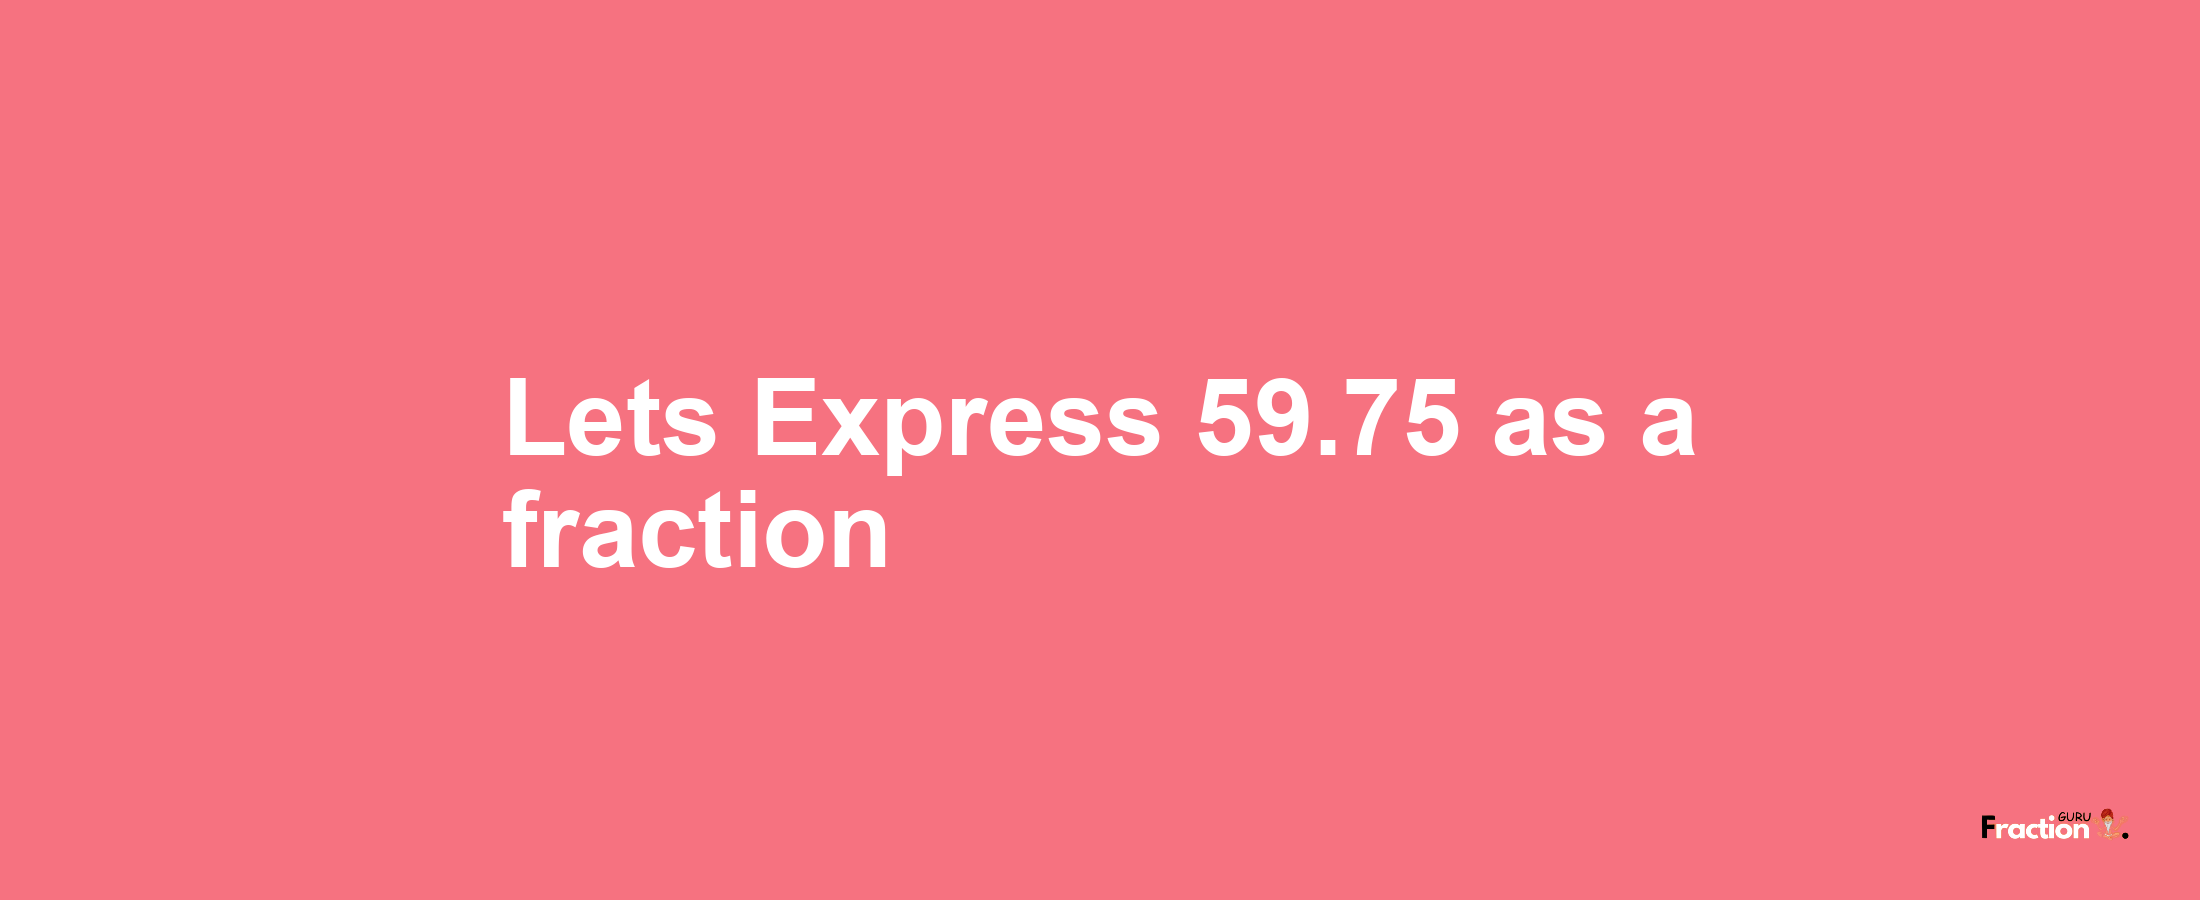 Lets Express 59.75 as afraction